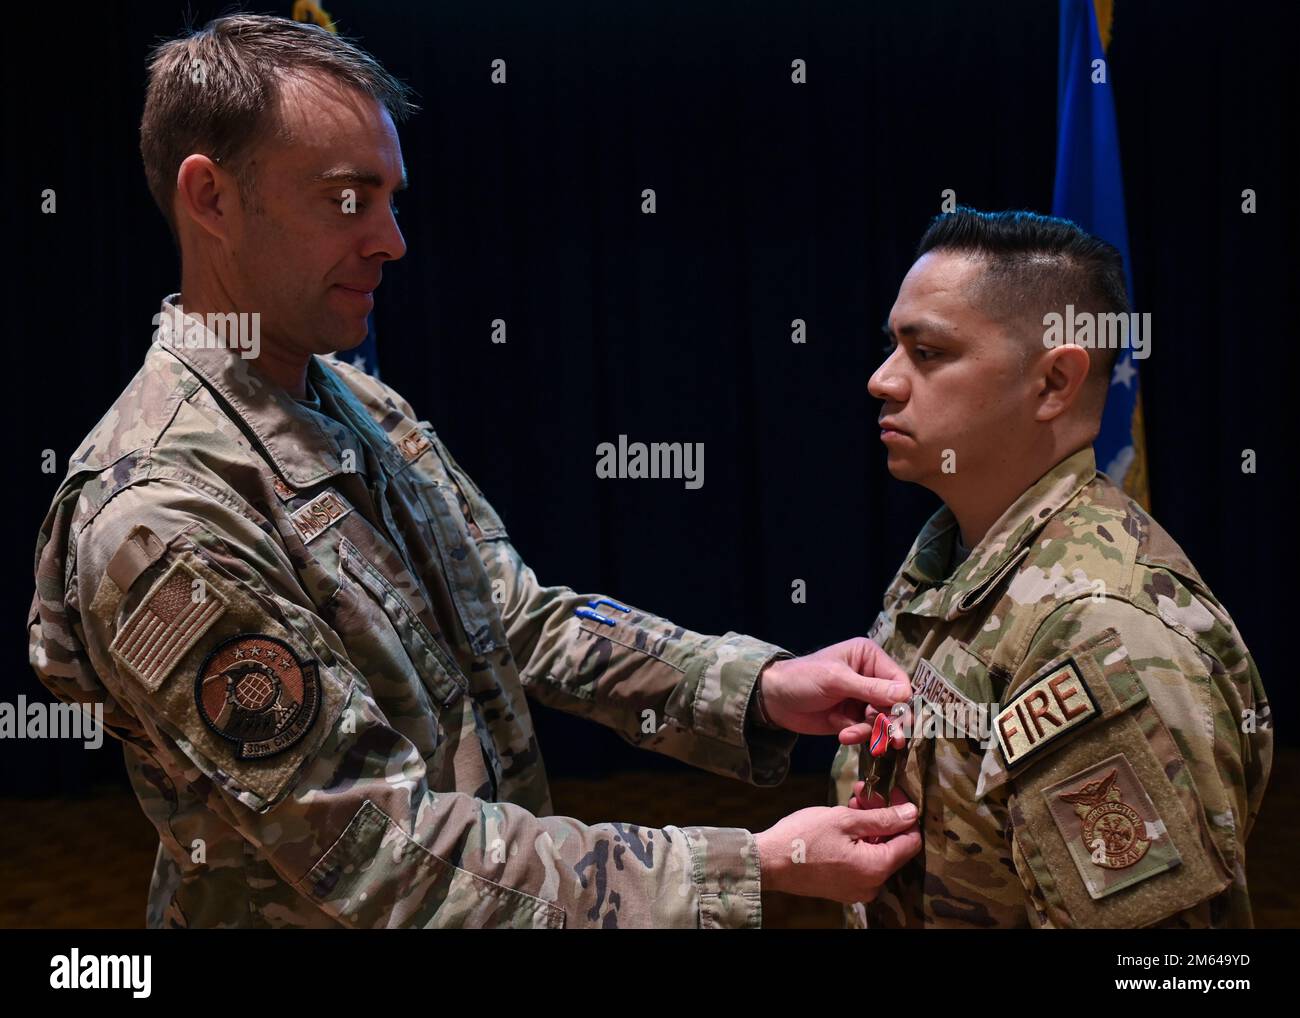 Lt. Col. Charles Hansen, 30th Civil Engineer Squadron commander, presents a Bronze Star Medal to Master Sgt. Roy Campos, 30th Civil Engineer Squadron readiness division chief on Vandenberg Space Force Base, Calif., March 31, 2022. Campos directed immediate action that moved his team into defensive fighting positions to maintain perimeter security for over eight hours, and directed 22 emergency responses with one of them being outside the controlled perimeter while exposed to enemy forces. Stock Photo